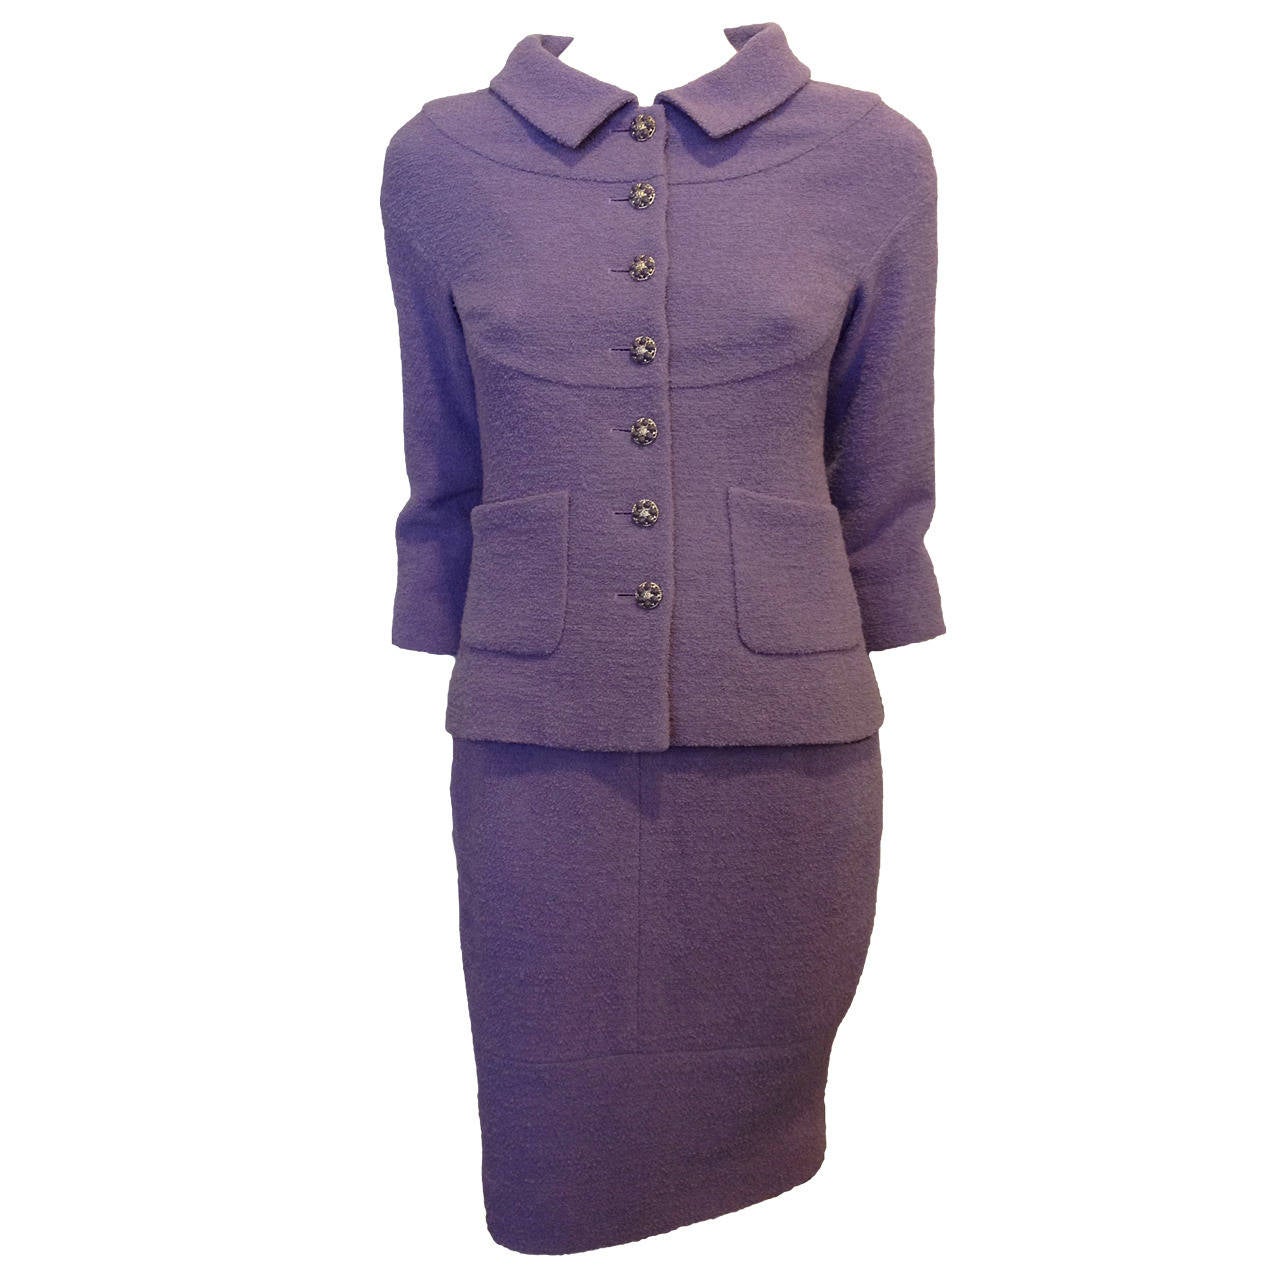 Chanel Lavender Tweed Suit with Purple Buttons